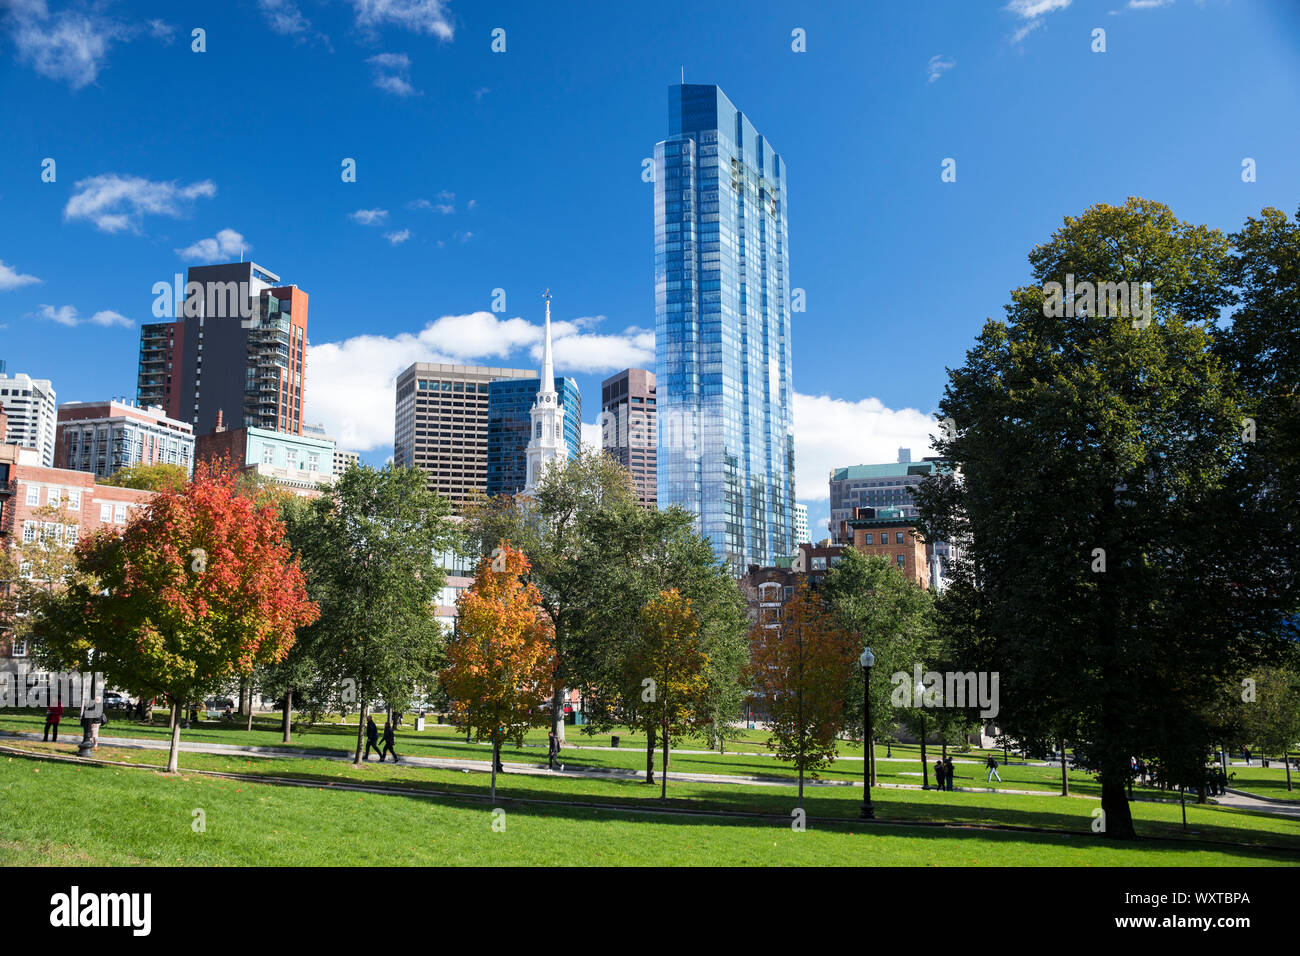 People strolling in Boston Common by the Public Garden city park and skyscrapers in Boston, Massachusetts, USA Stock Photo